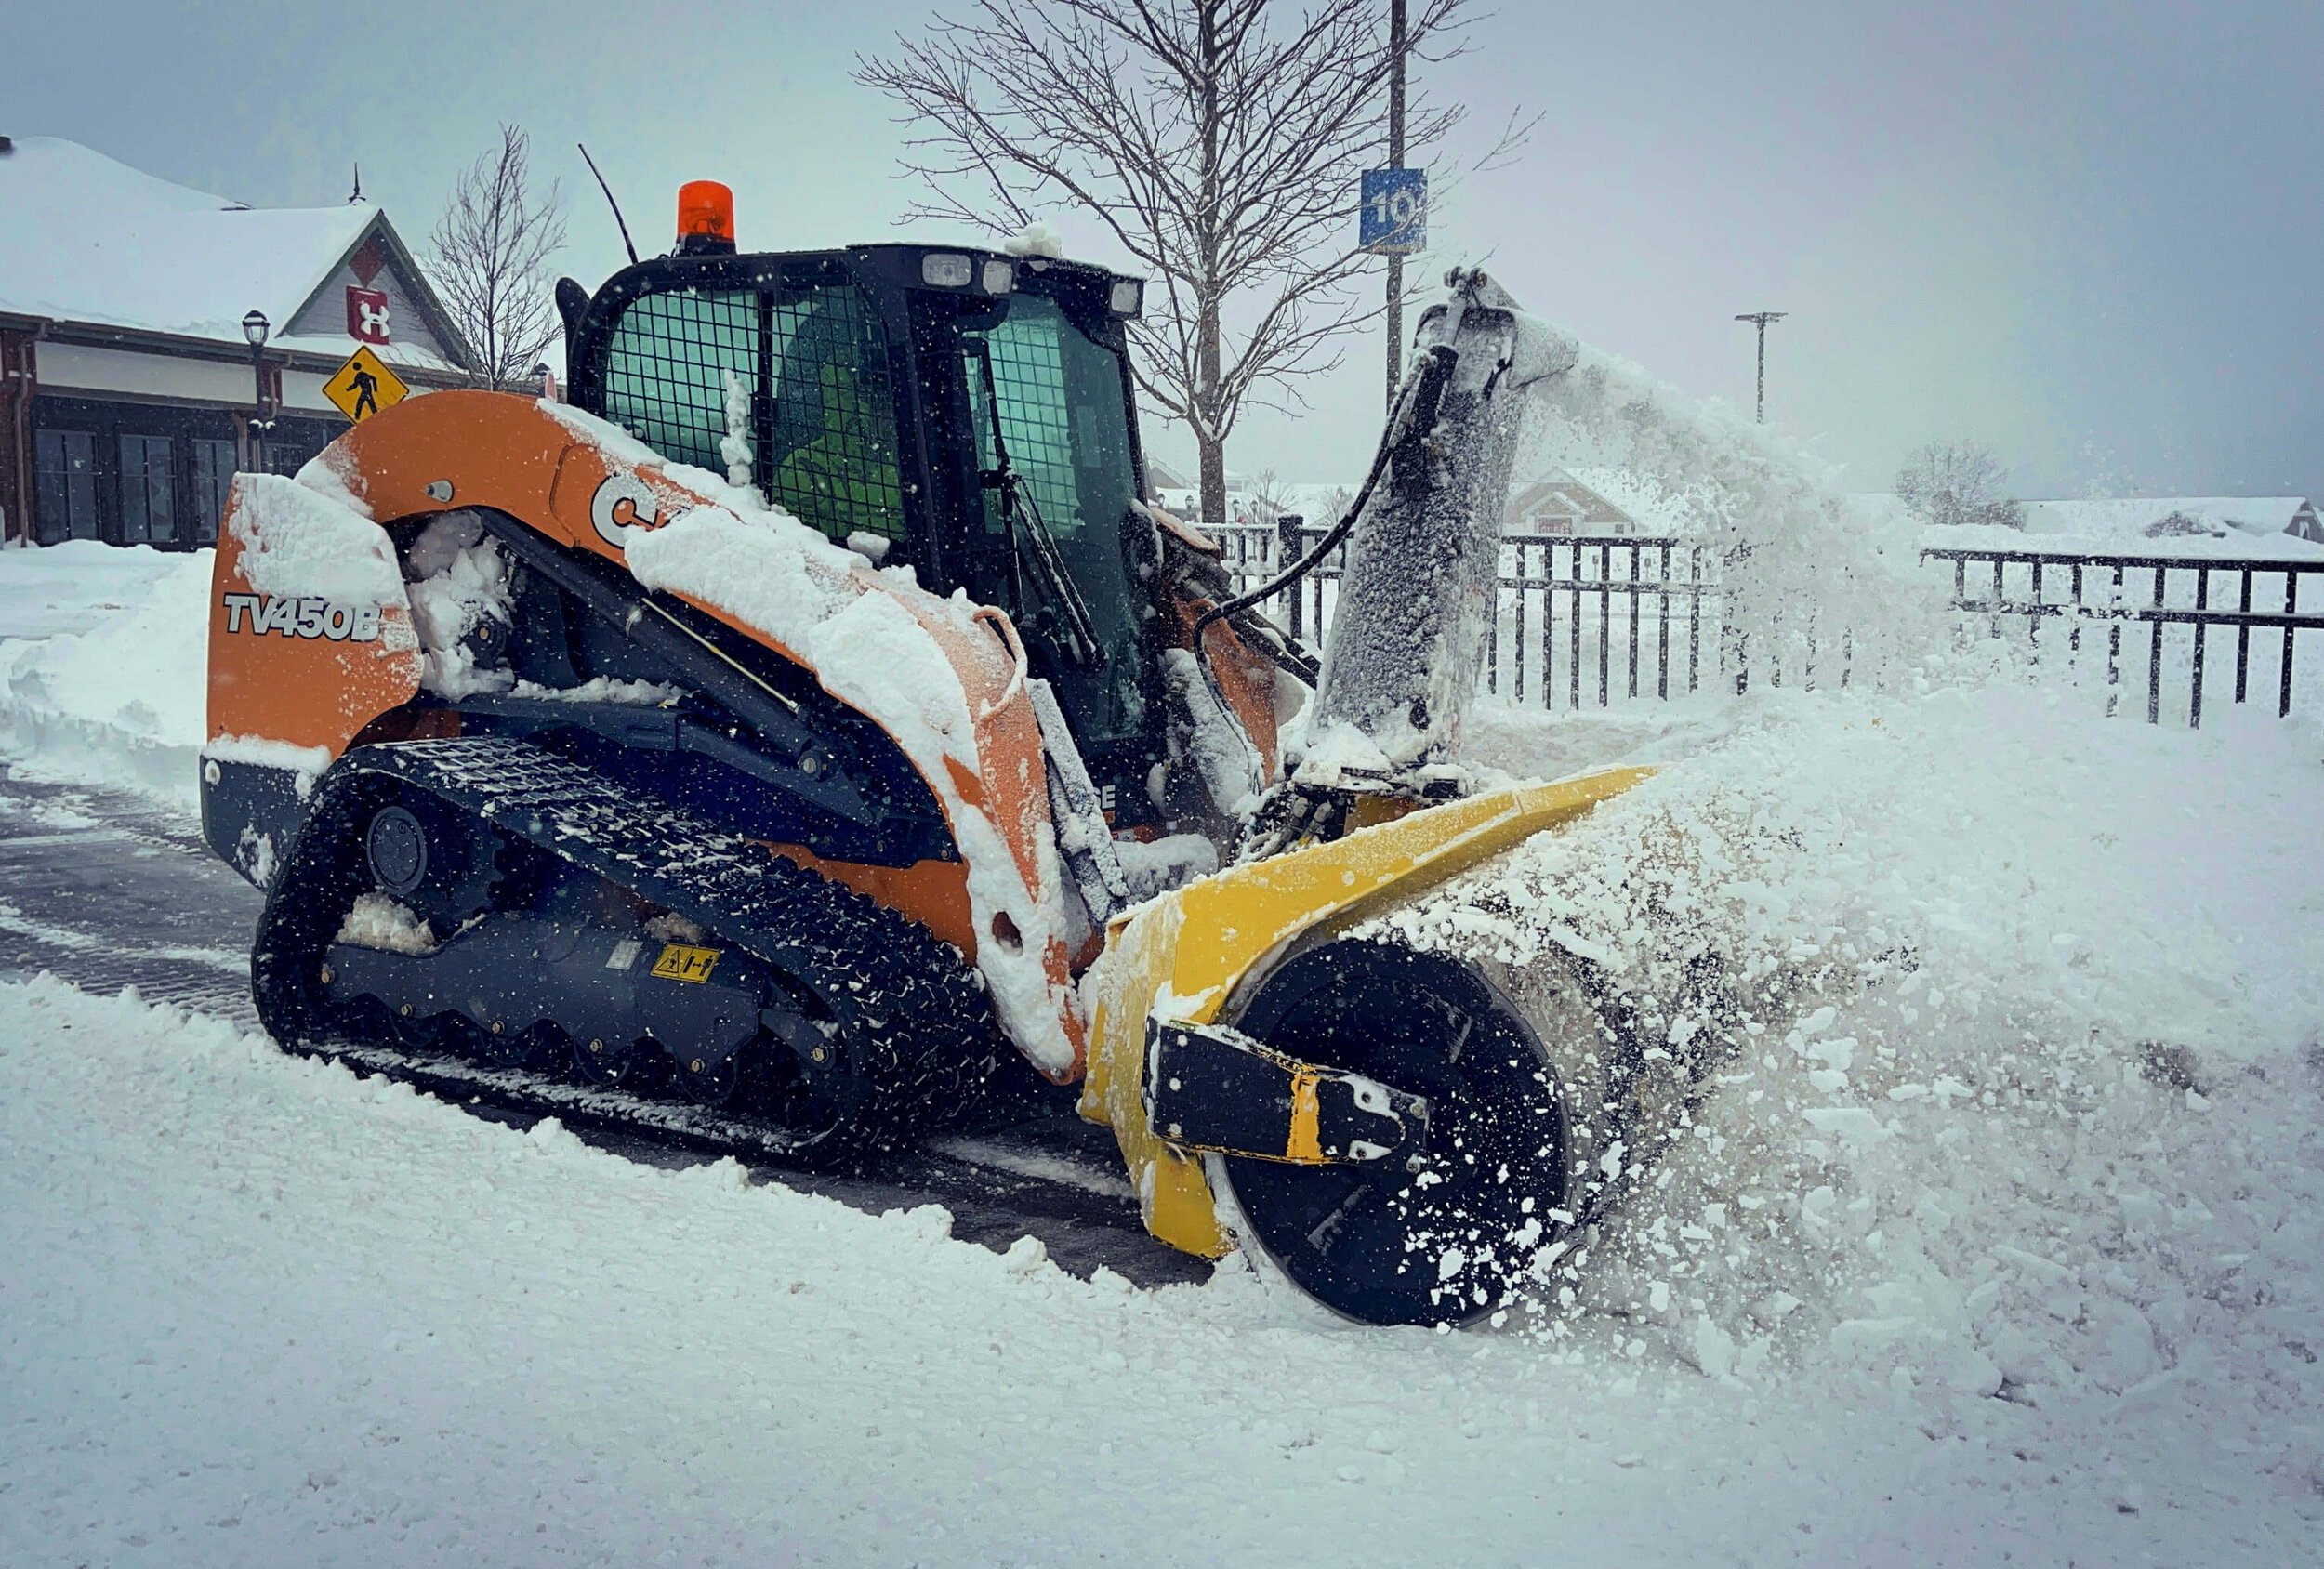 Case Skid Steer with Blower Attached Blowing Snow in New York State.jpg